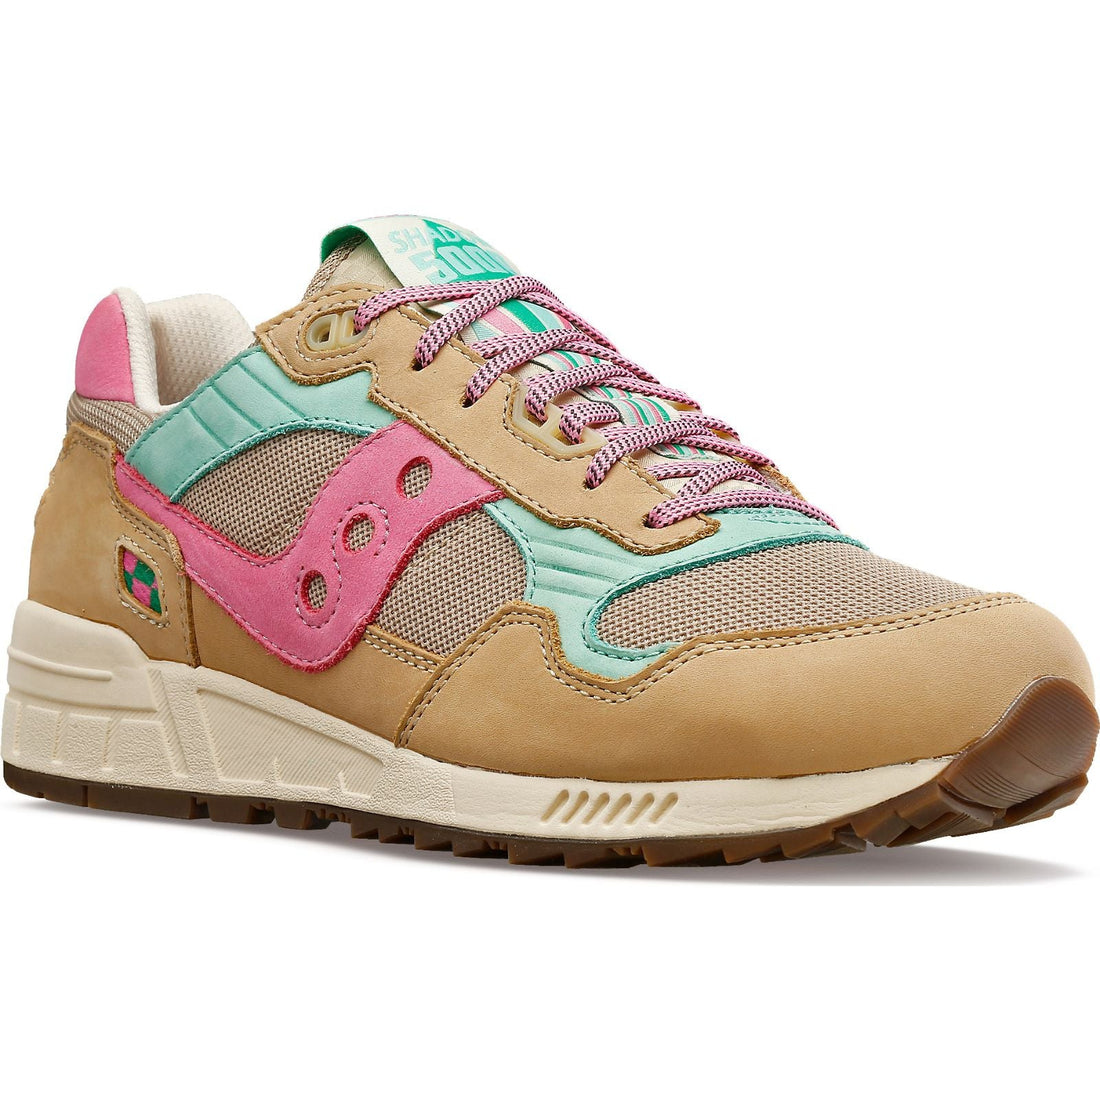 SAUCONY  – SHADOW 5000 EARTH CITIZEN - GRAY / PINK